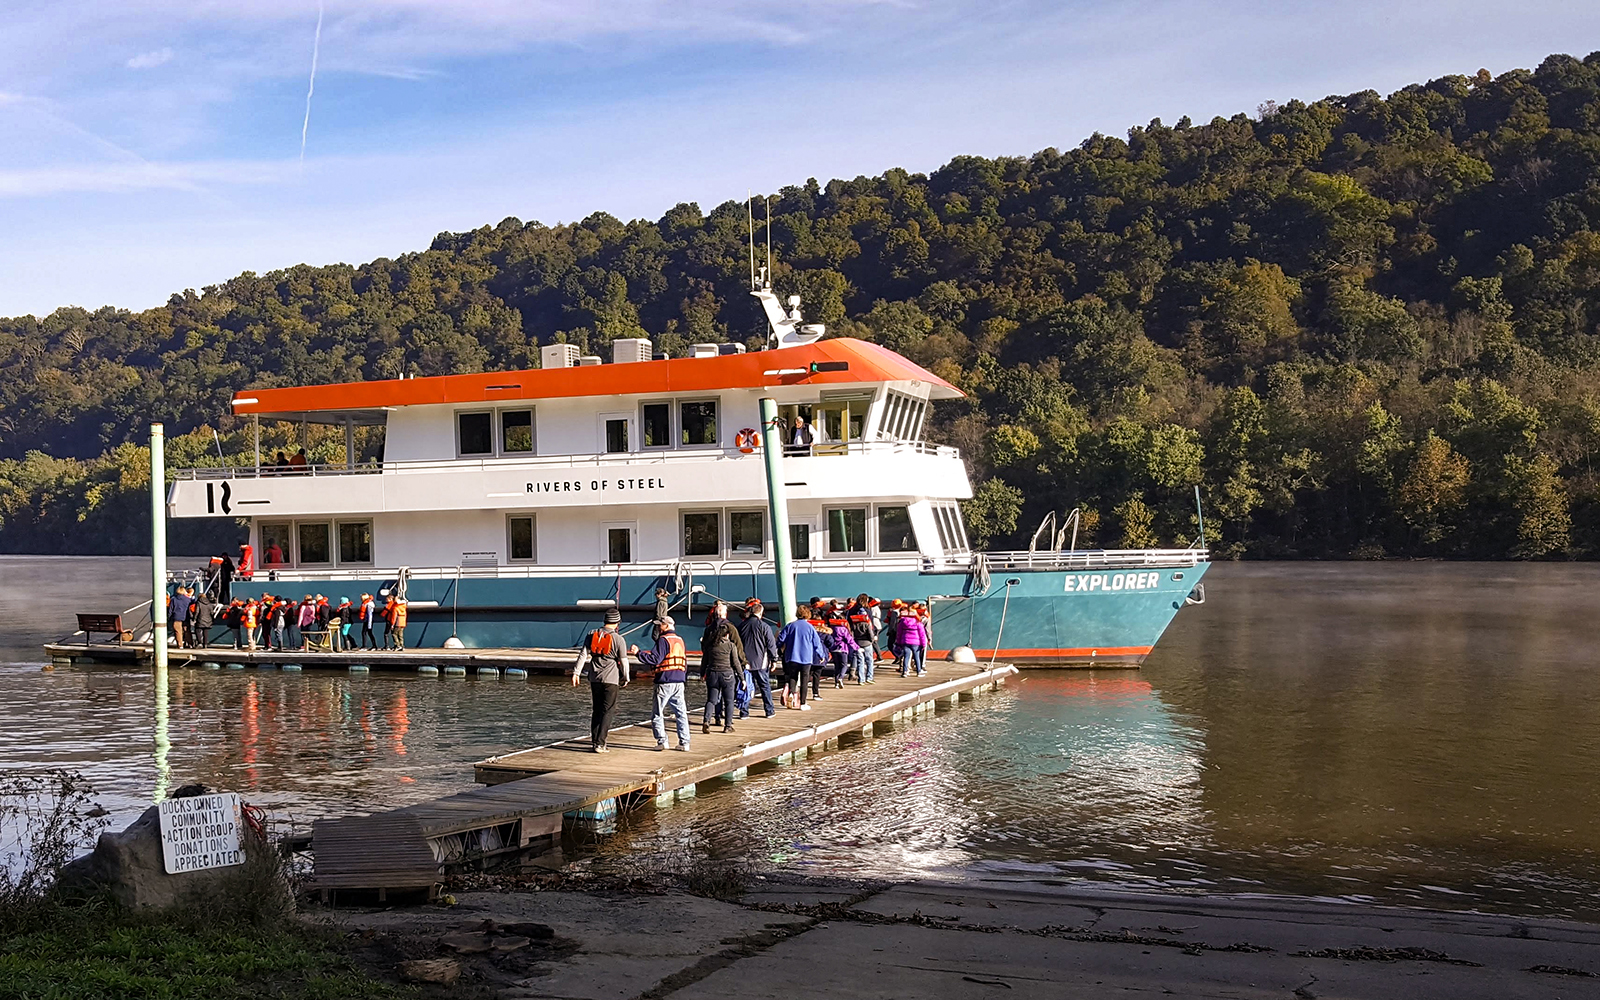 The Explorer riverboat at dock with students entering the boat.